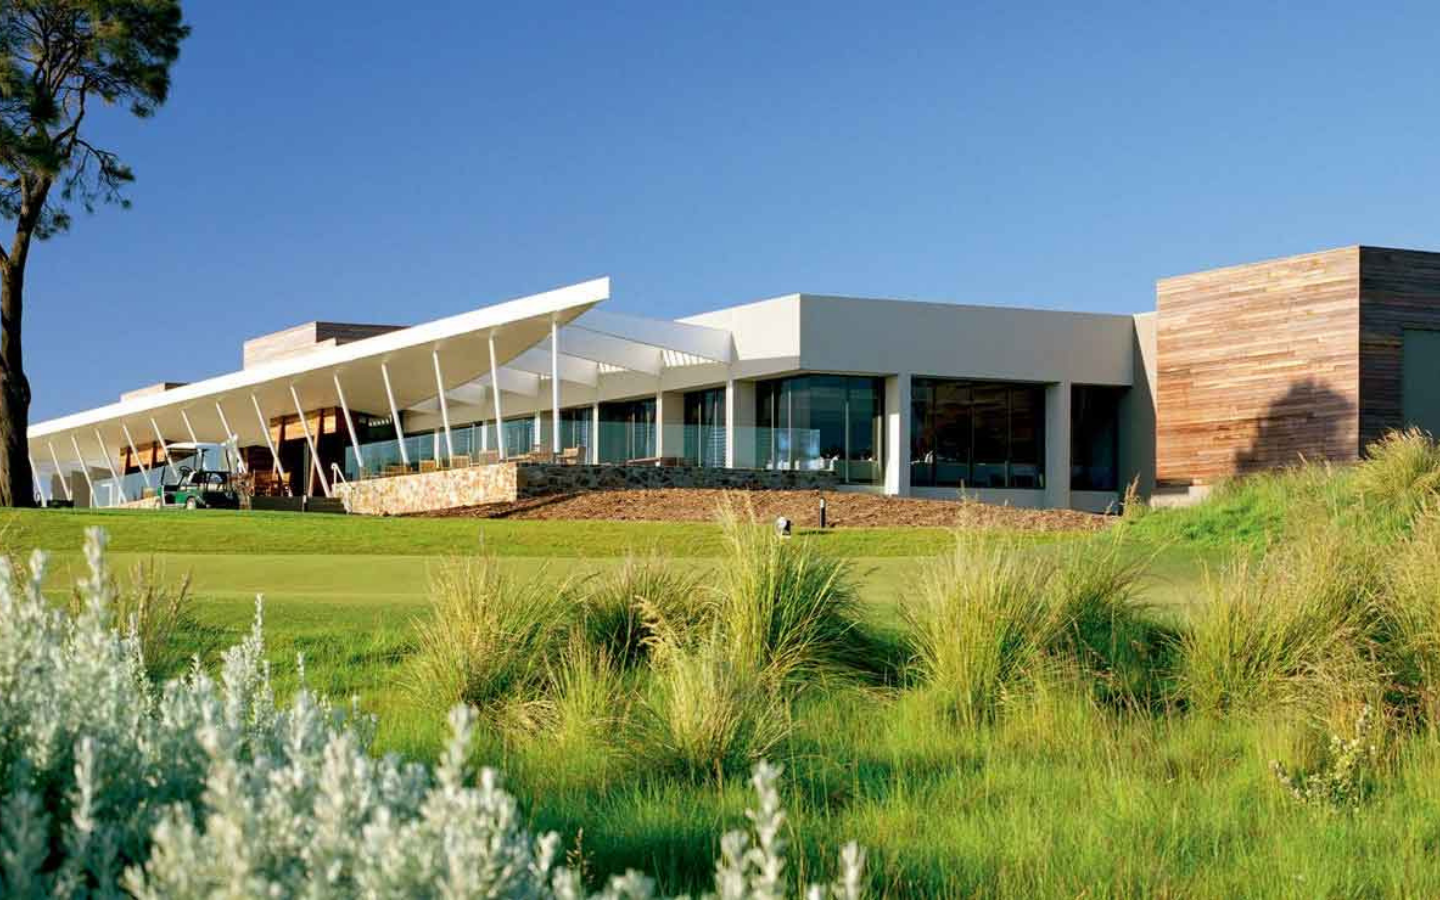 view of architectural building, grasses in the foreground, golf buggies in the background